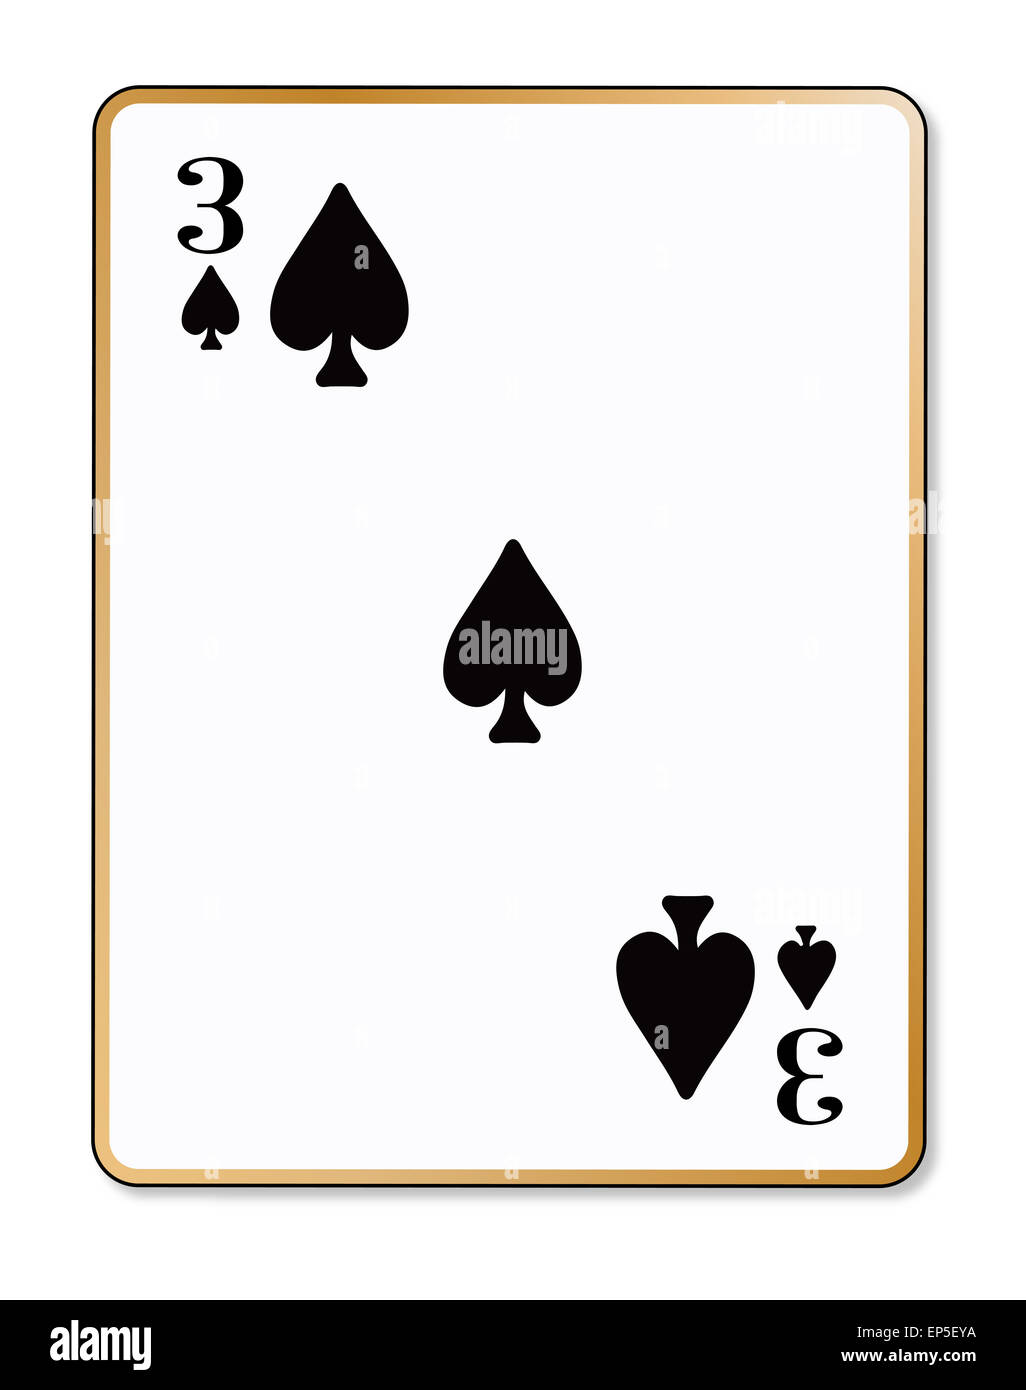 The playing card the Three of spades over a white background Stock Photo